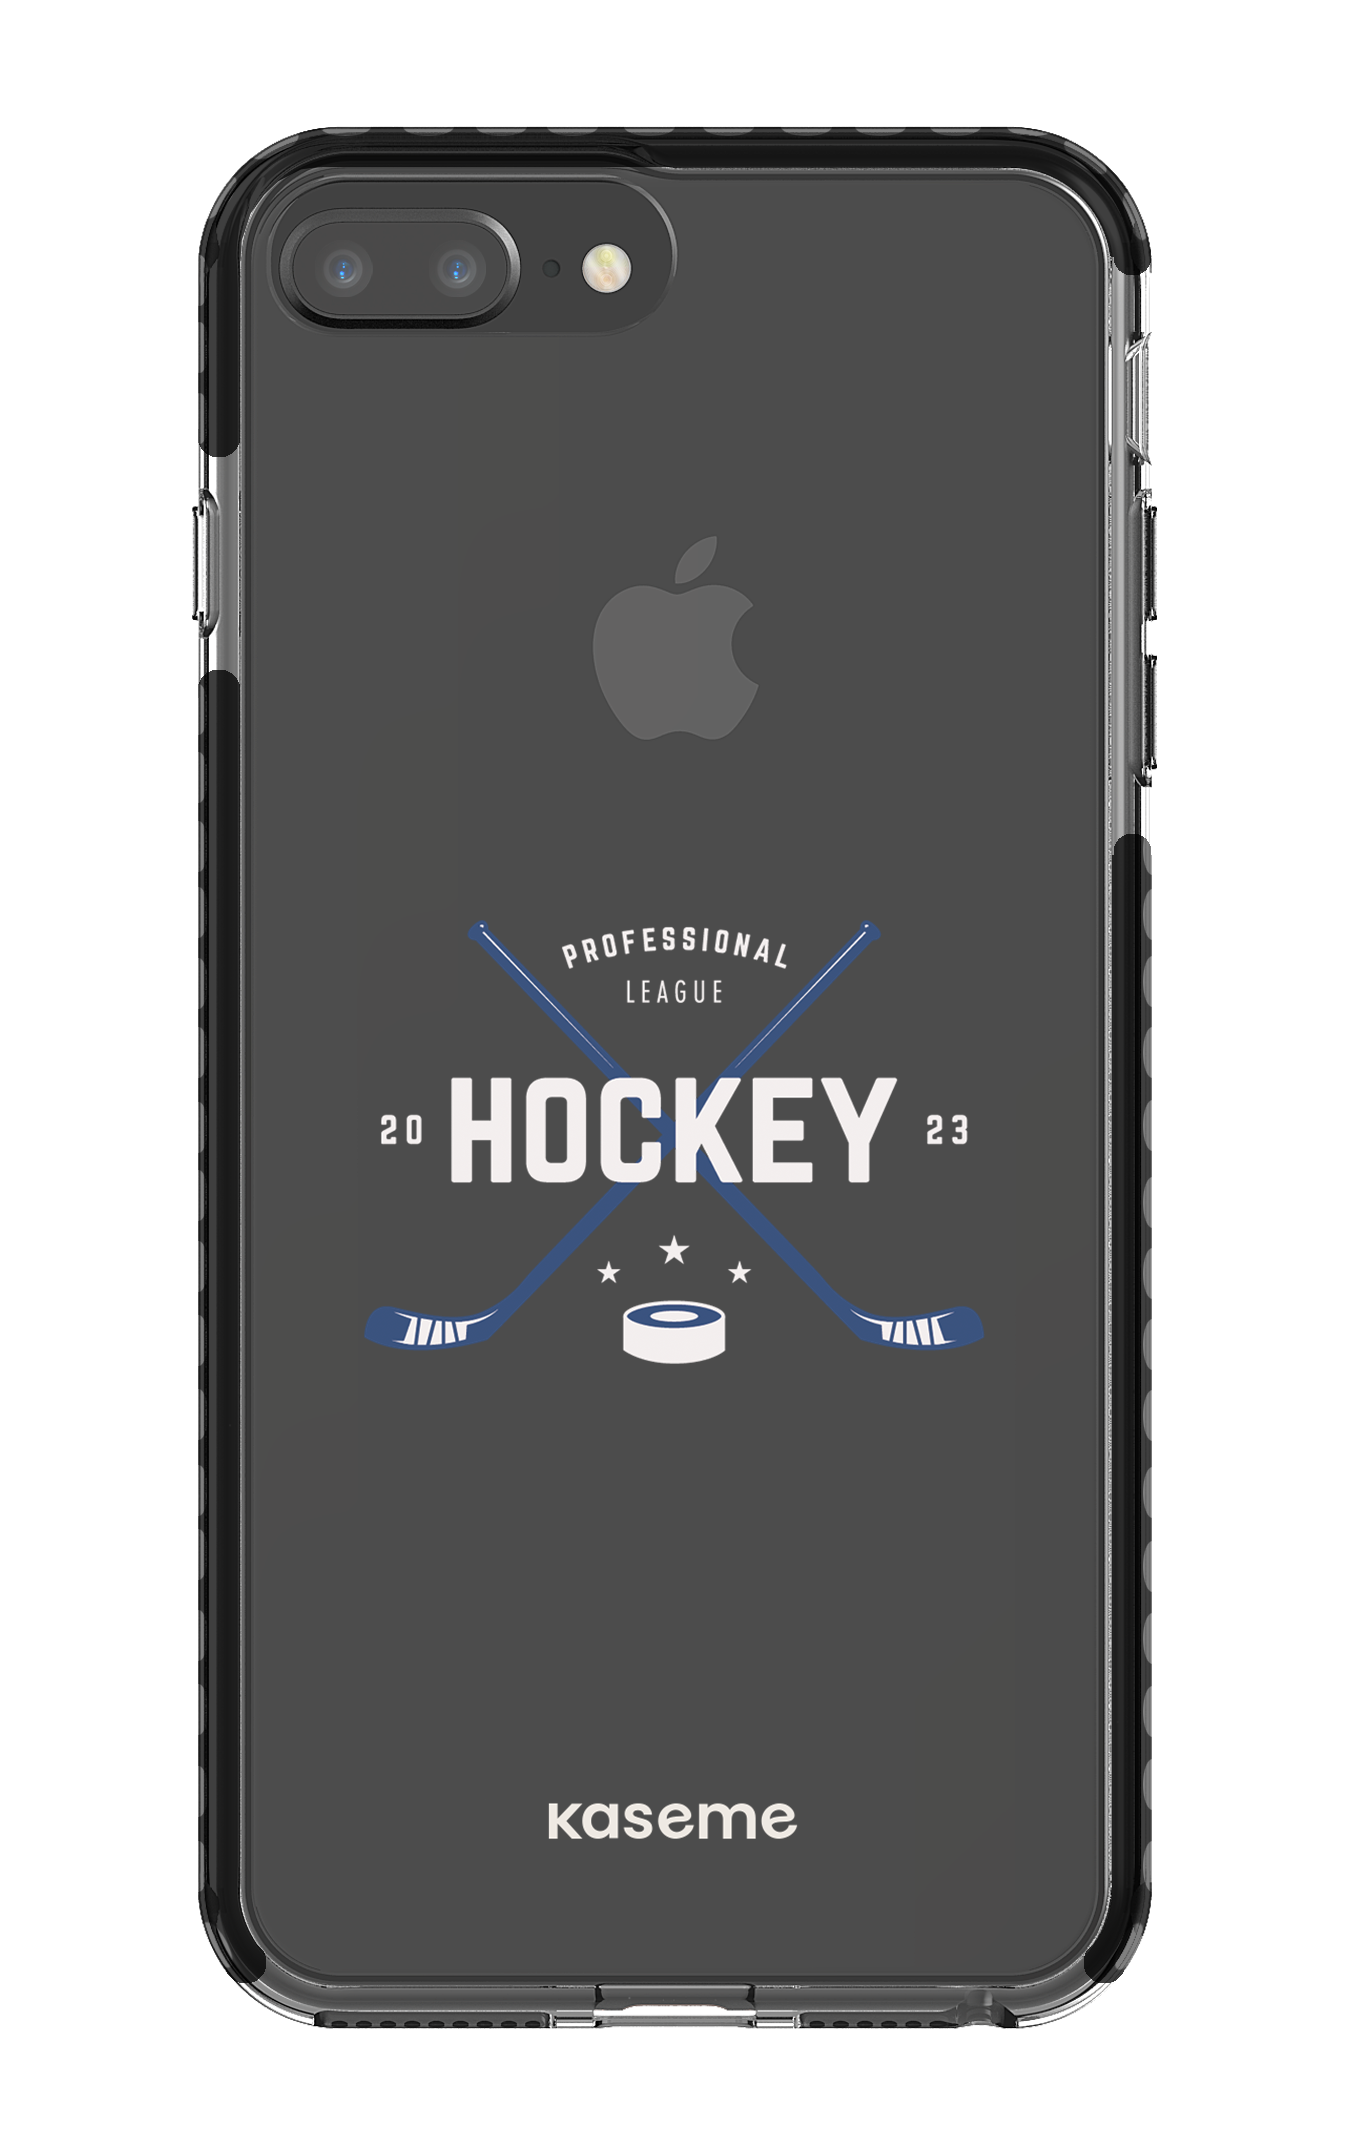 Playoffs clear case - iPhone 7/8 Plus